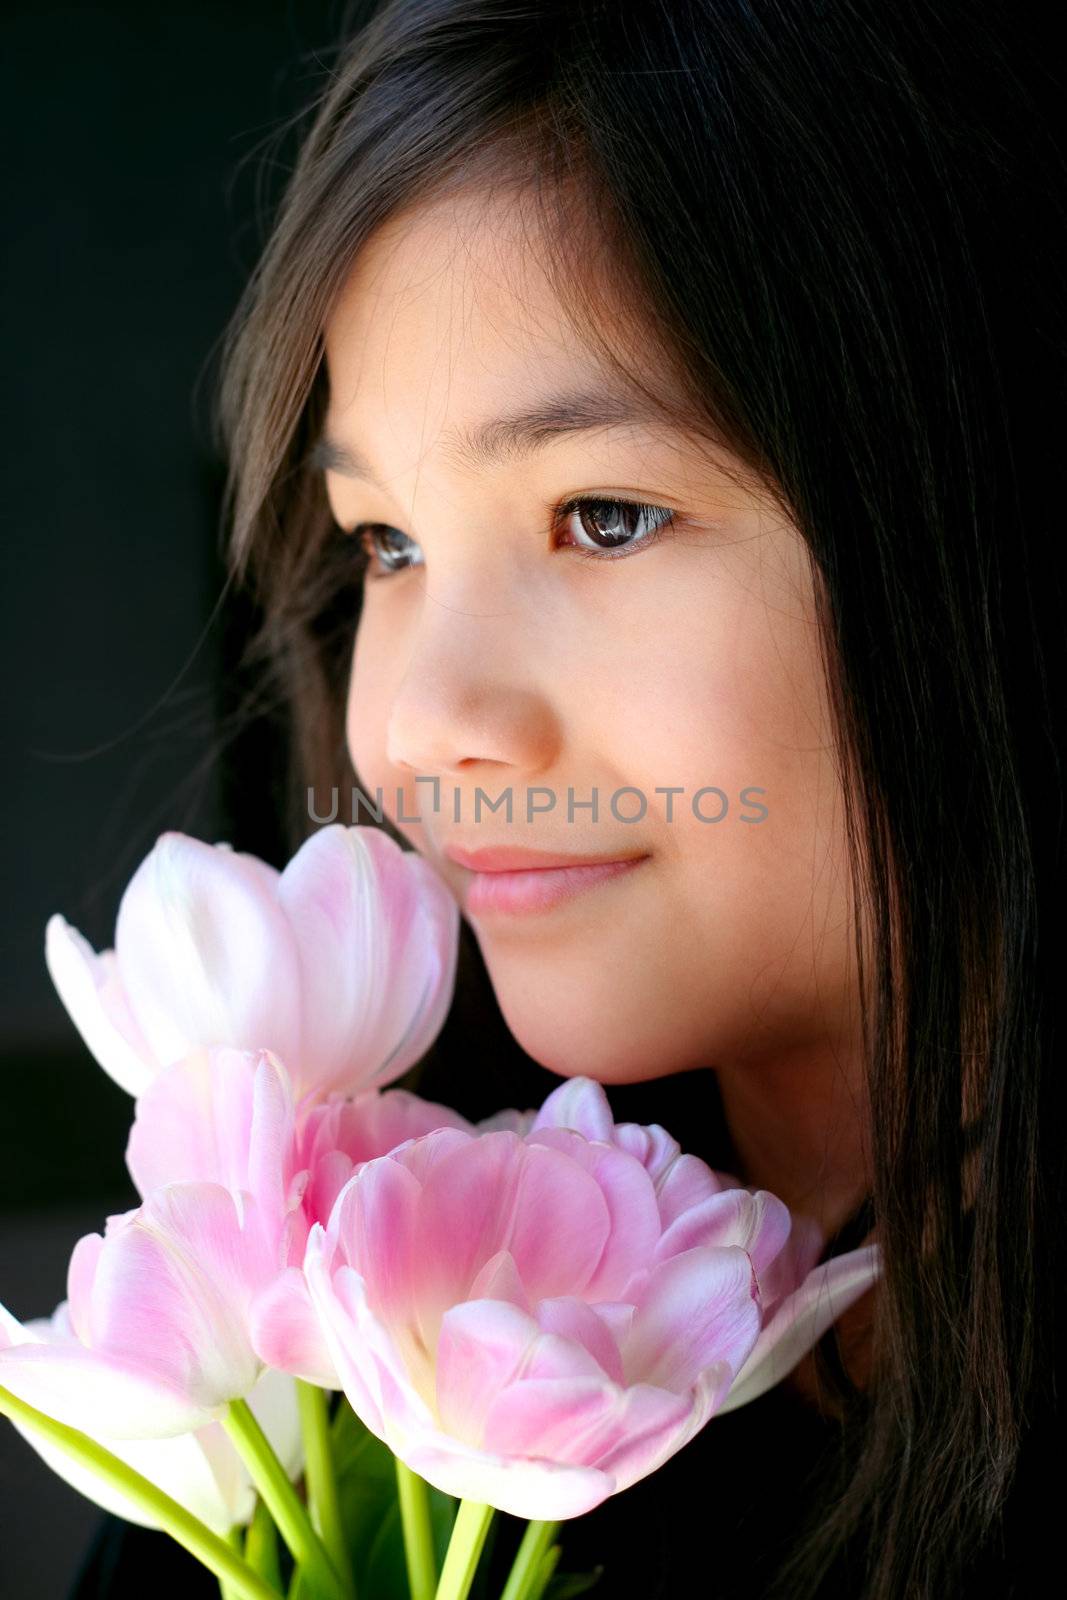 Beautiful little girl with pink tulips by face, looking off to side